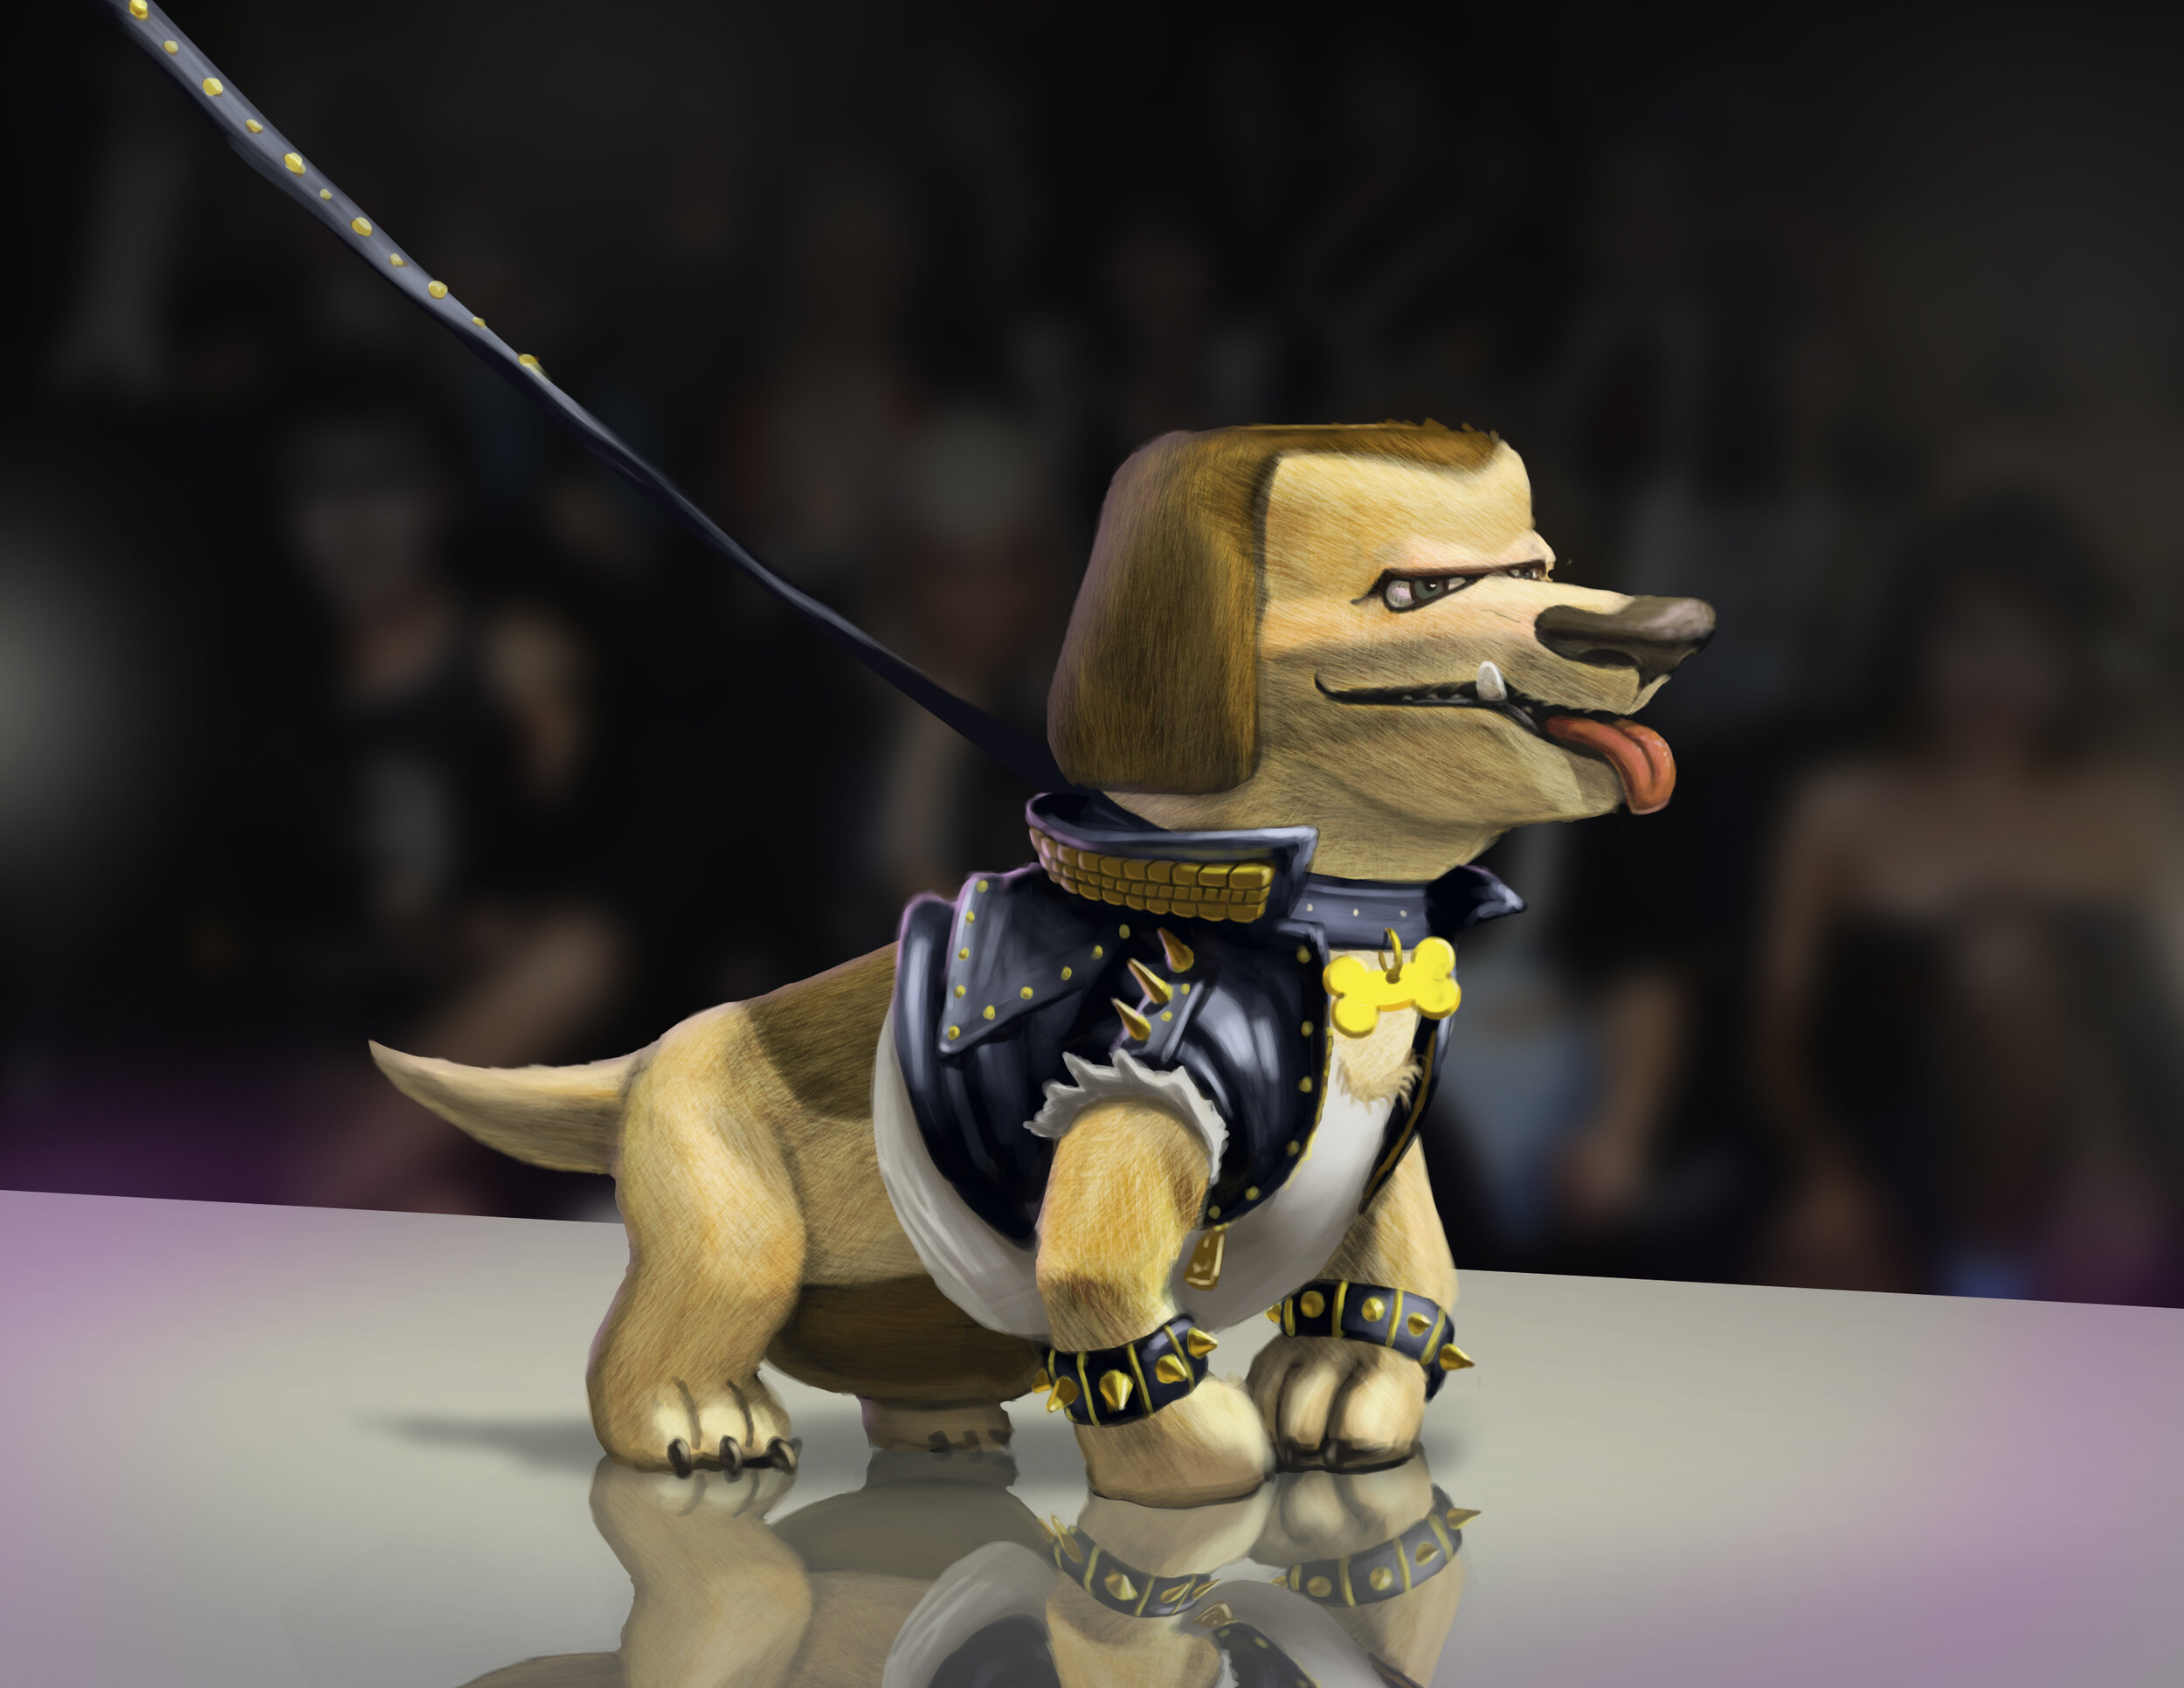 3D Model of the Momager’s Dog from the Unreleased Bratz Movie Concept.